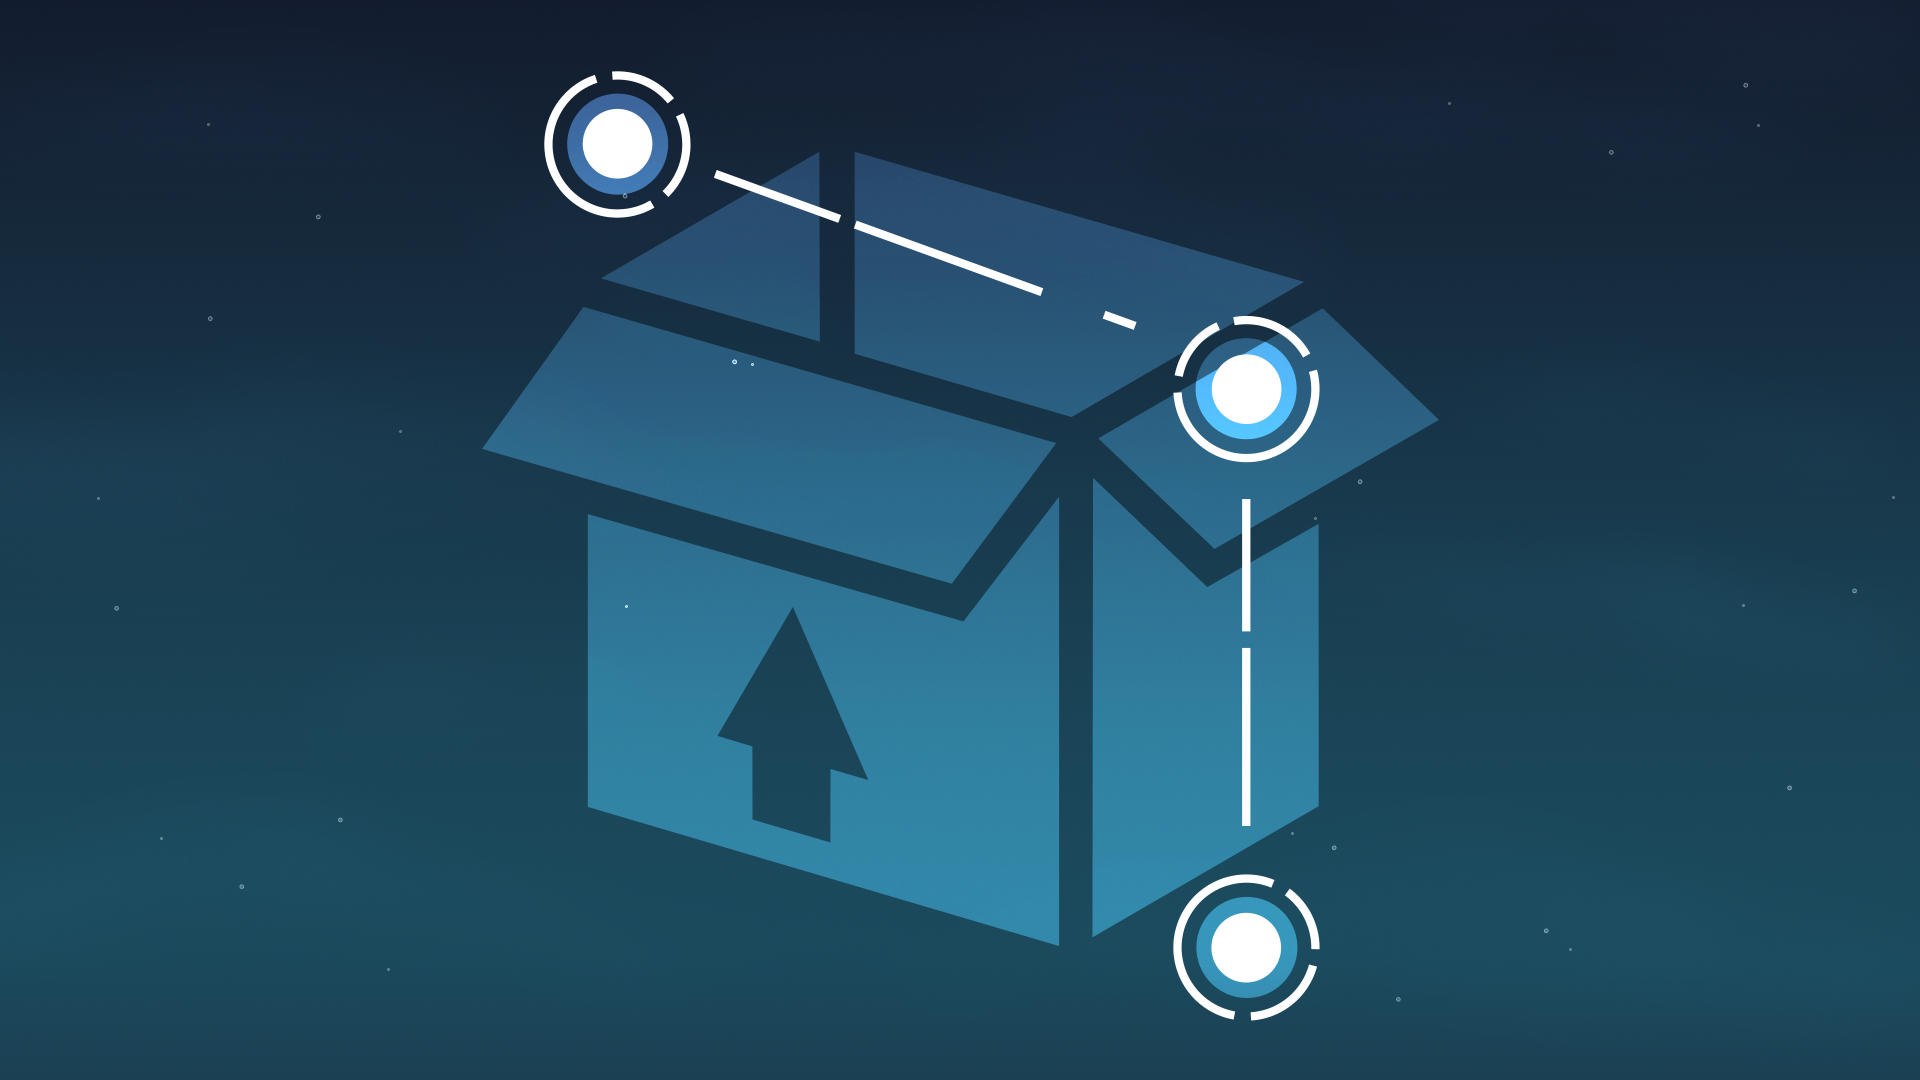 Icon for Moving In